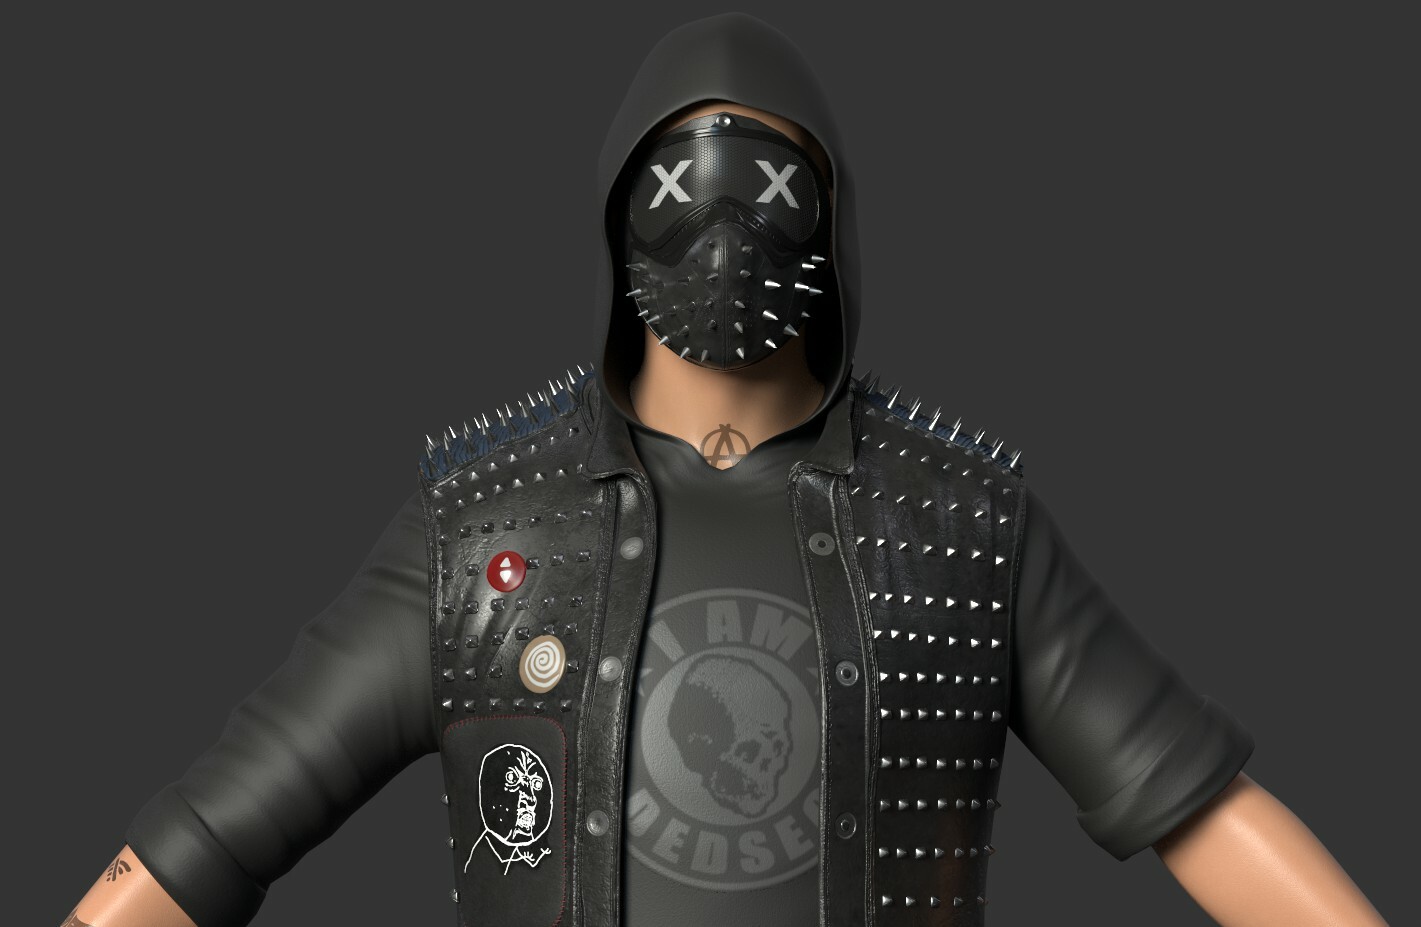 wrench watch dogs 2 mask